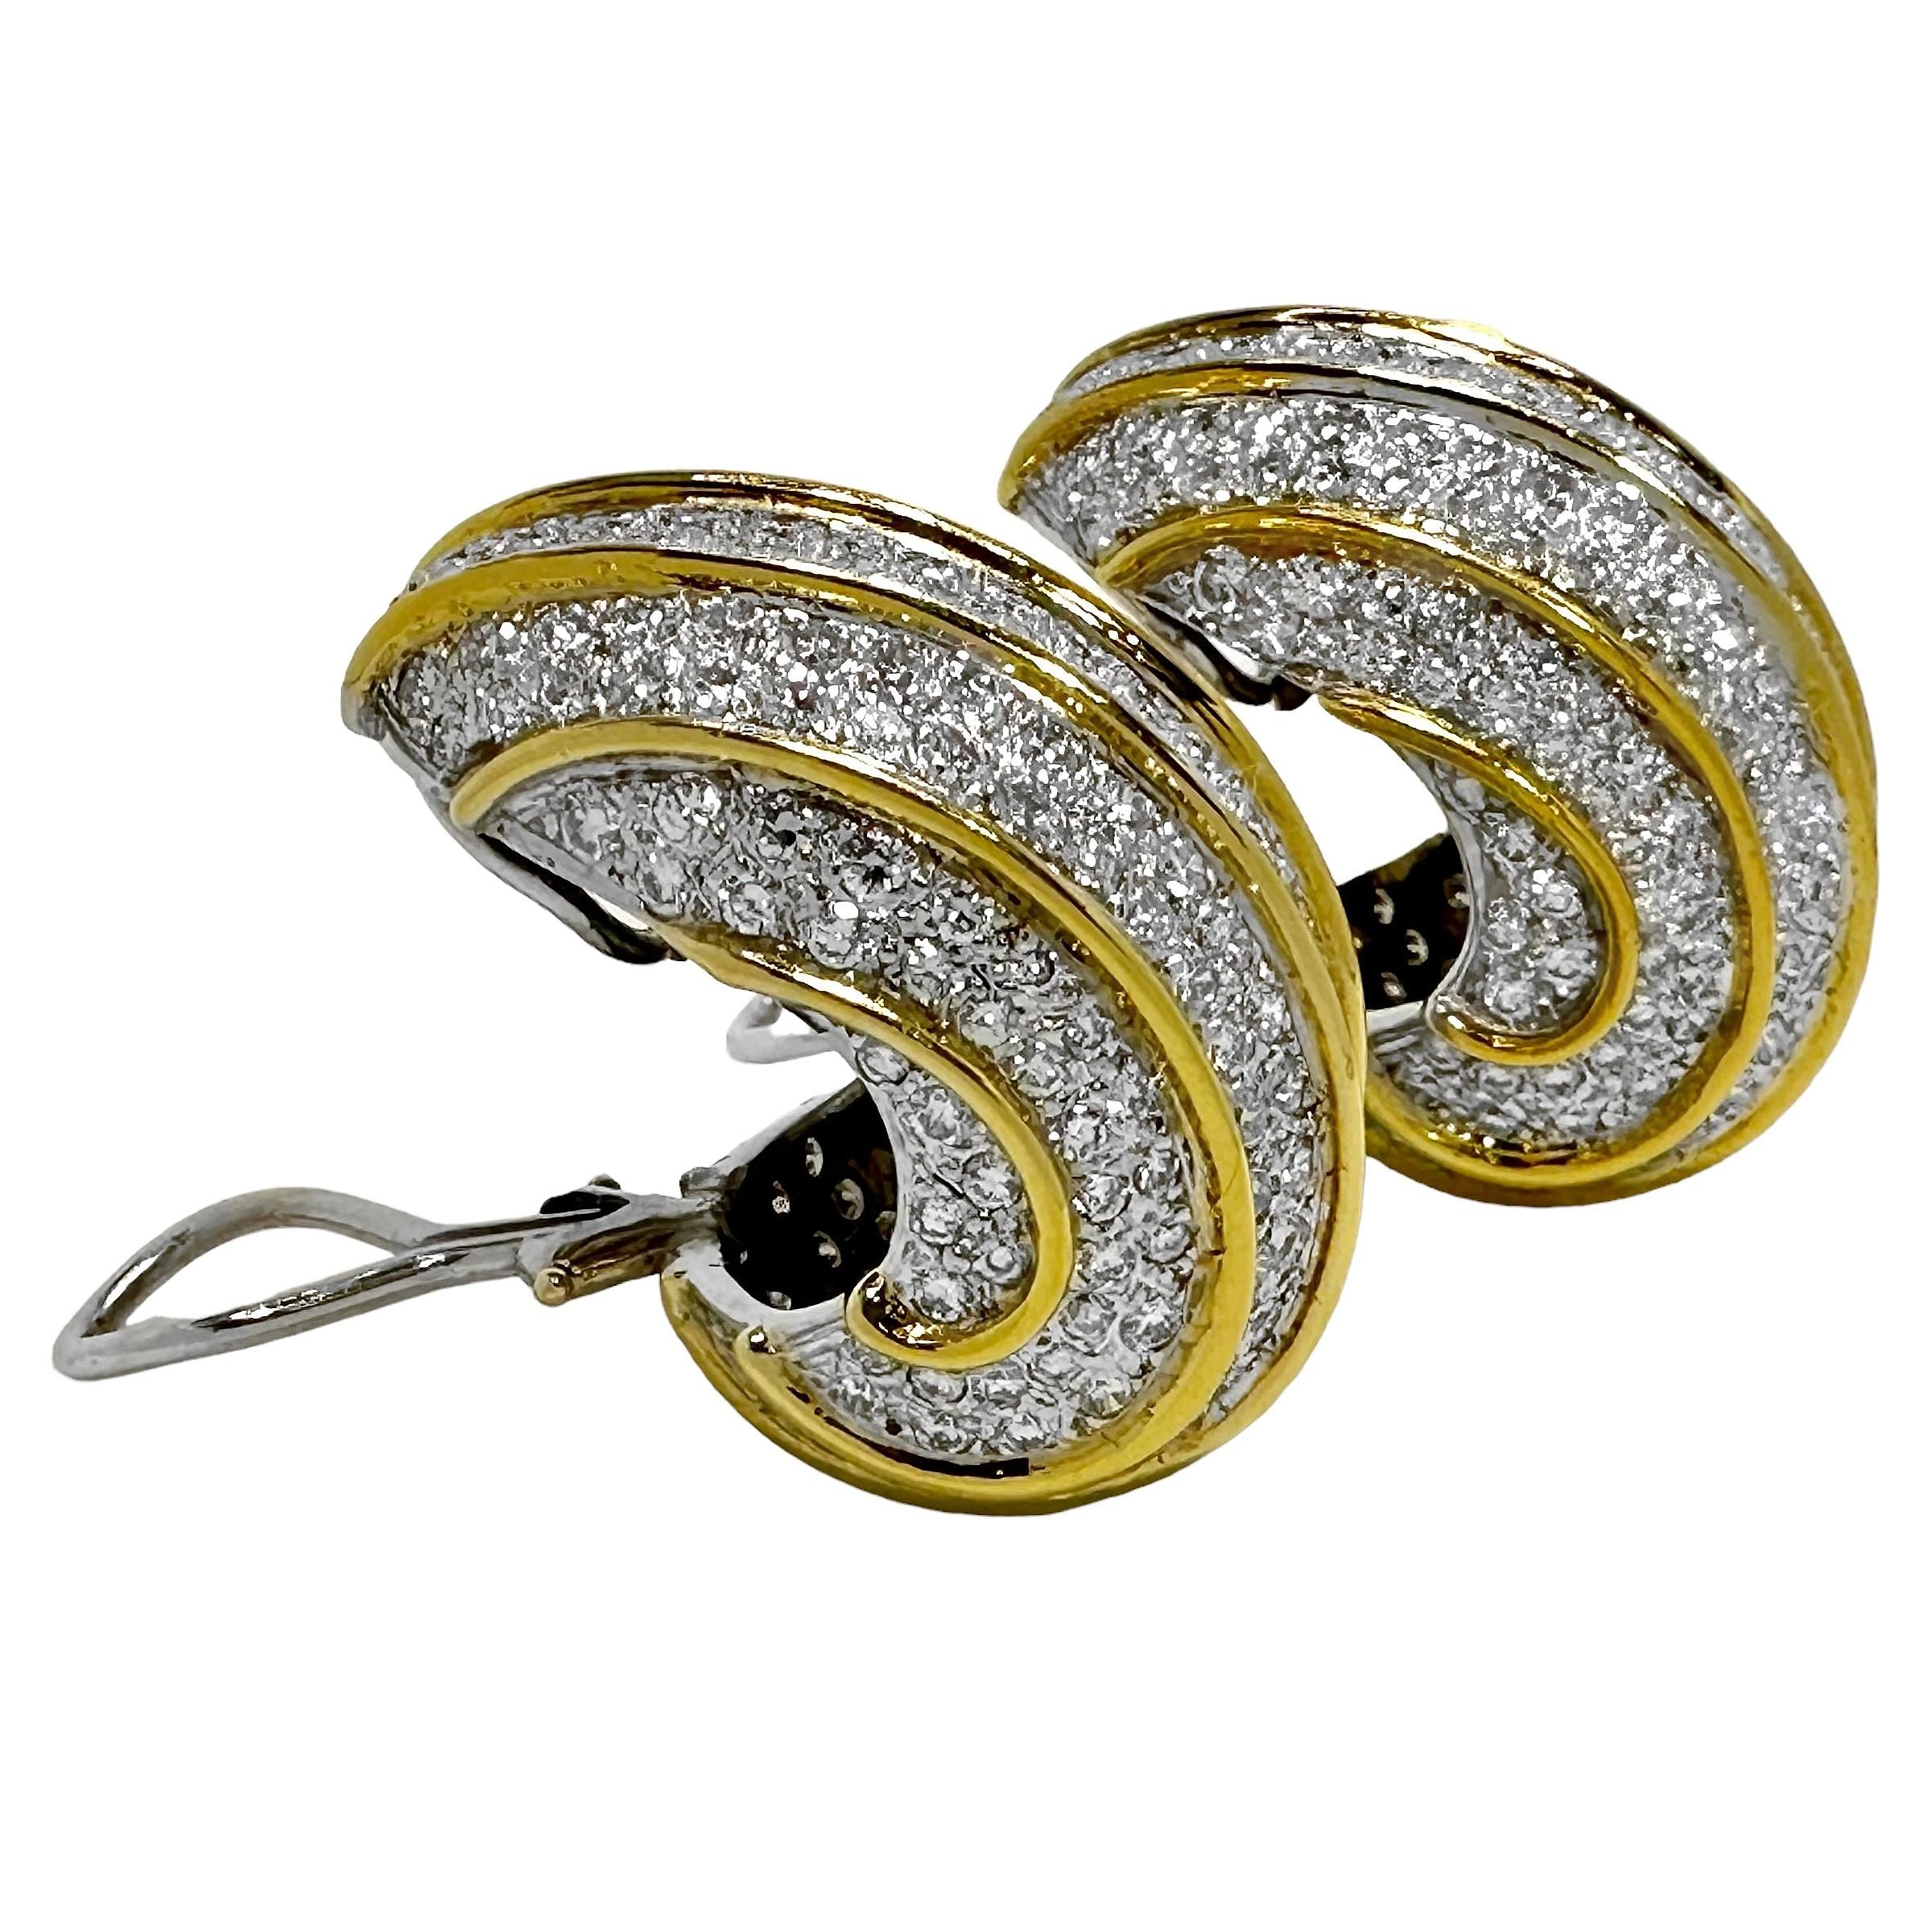 Women's 18K White & Yellow Gold Cocktail Earrings with 10Ct Total Approx. Diamond Weight For Sale